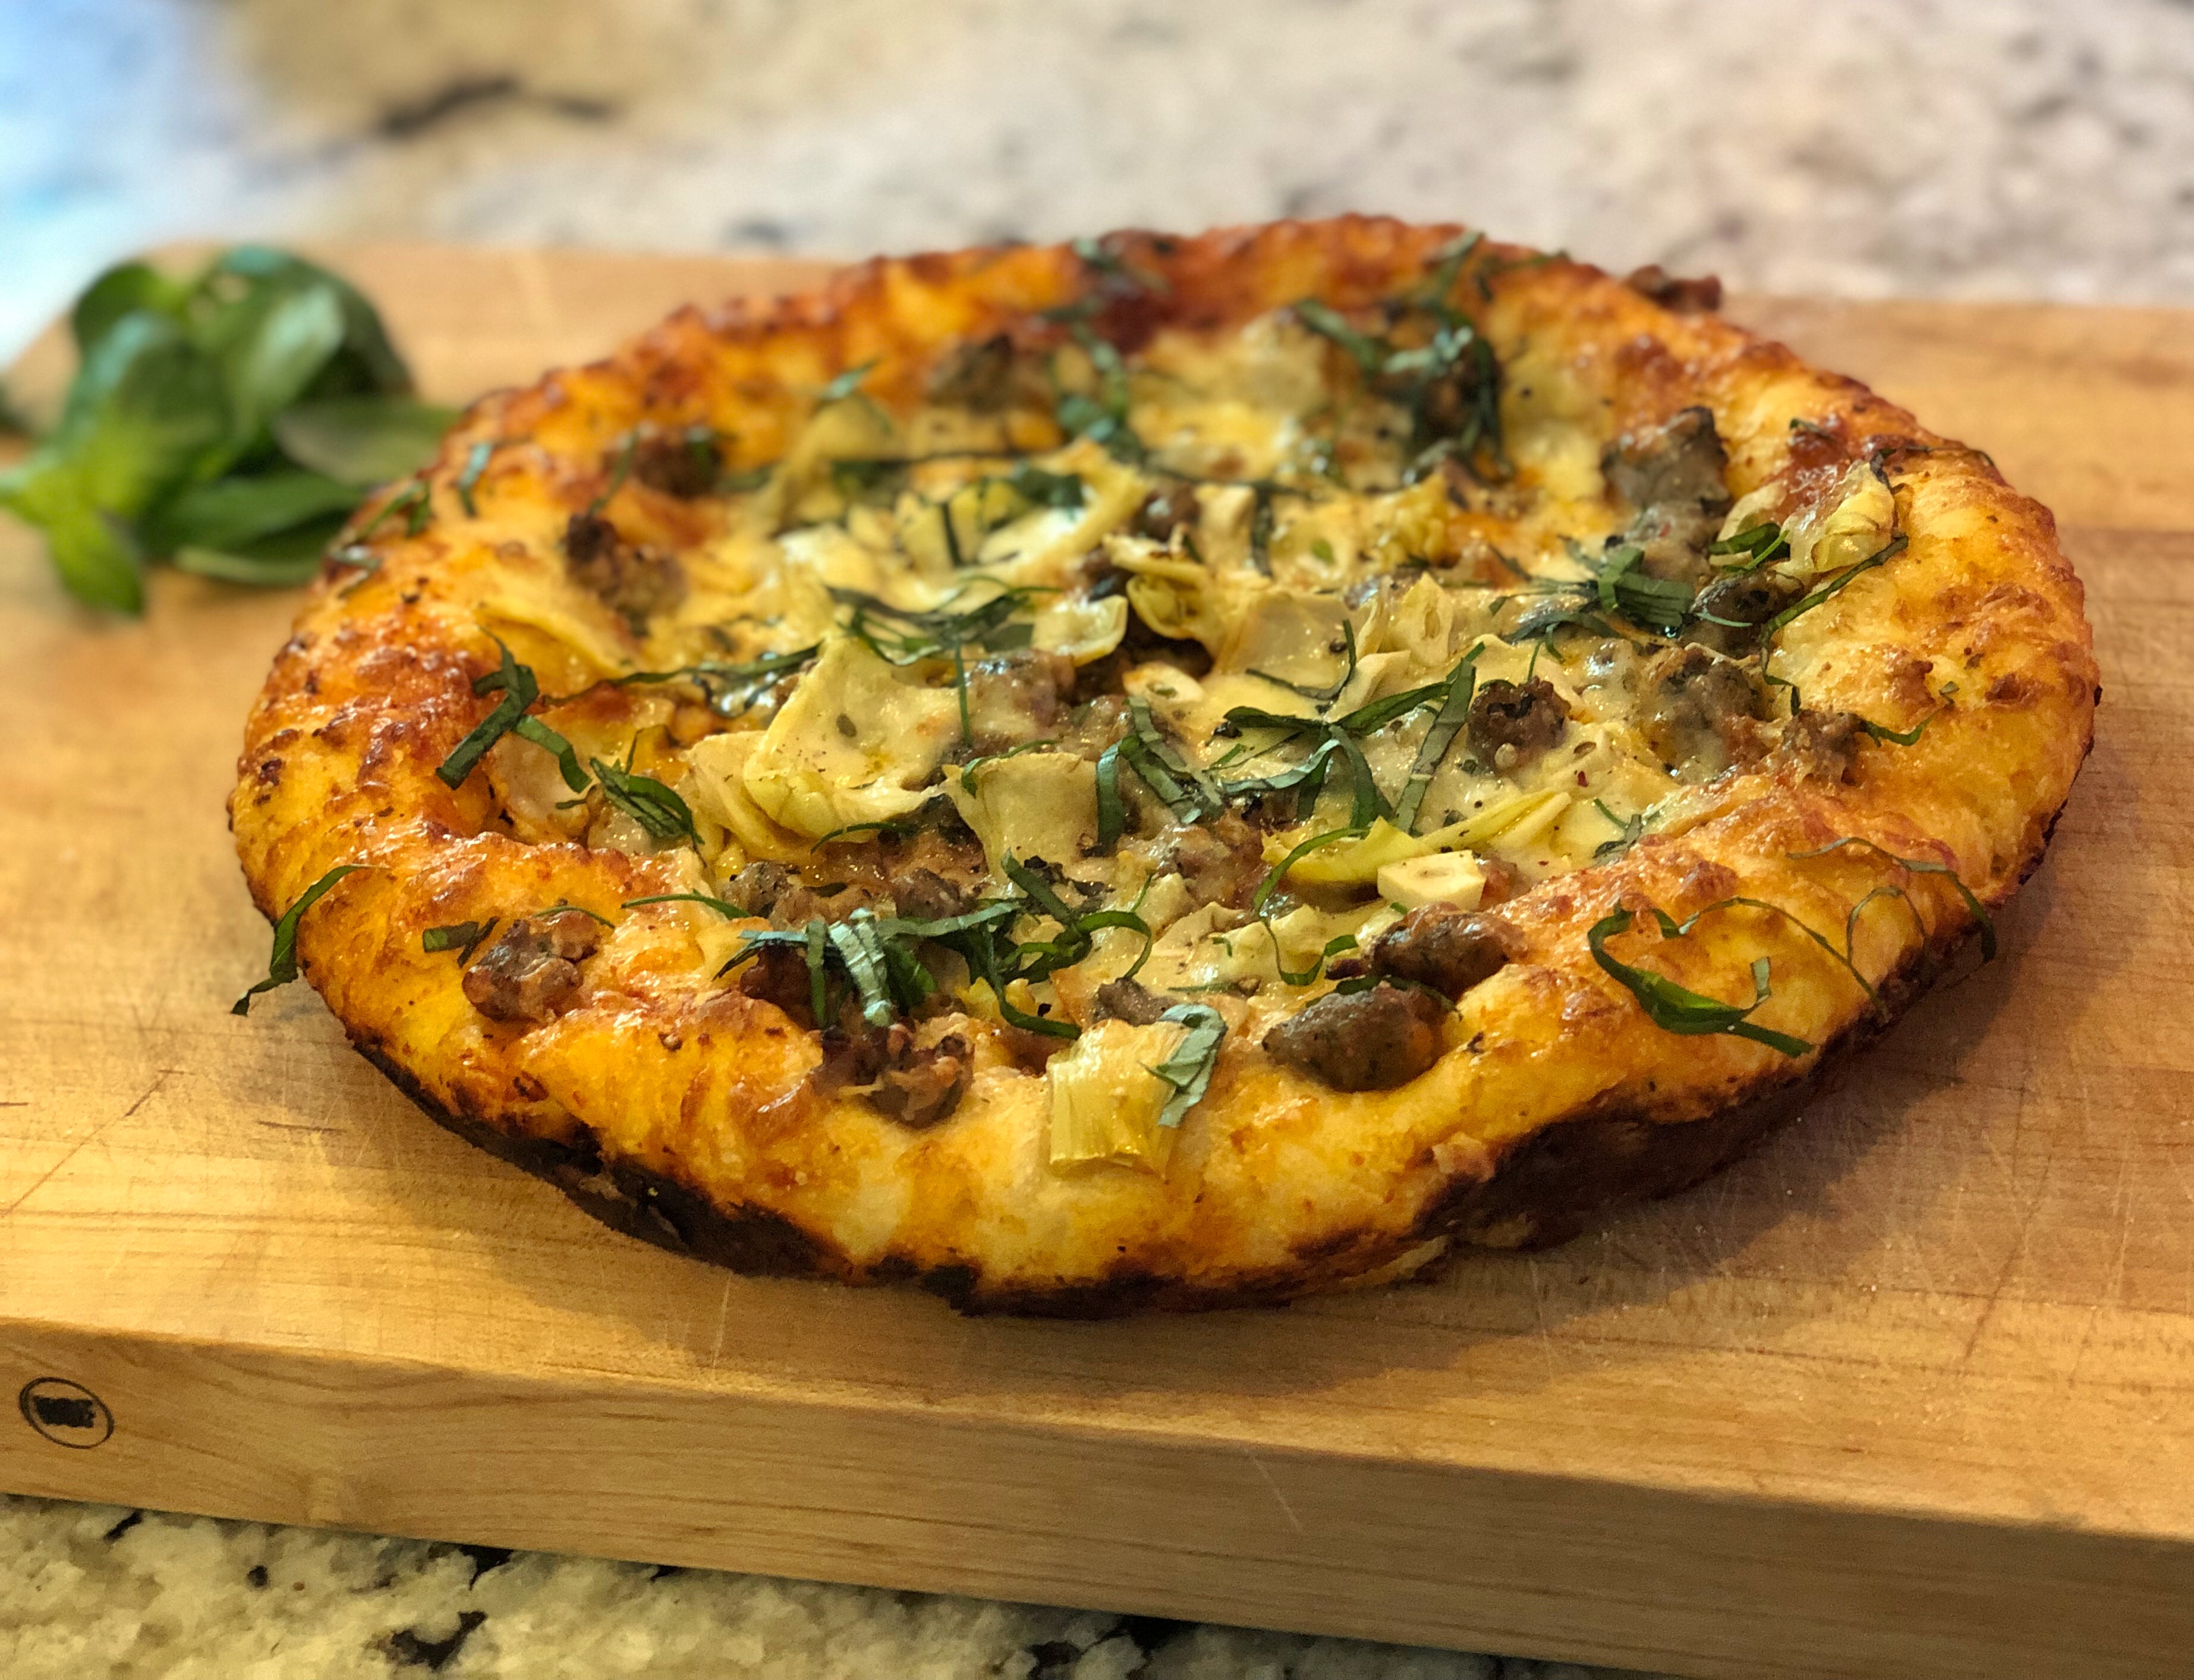 Cast-Iron Skillet Pizza with Sausage & Kale